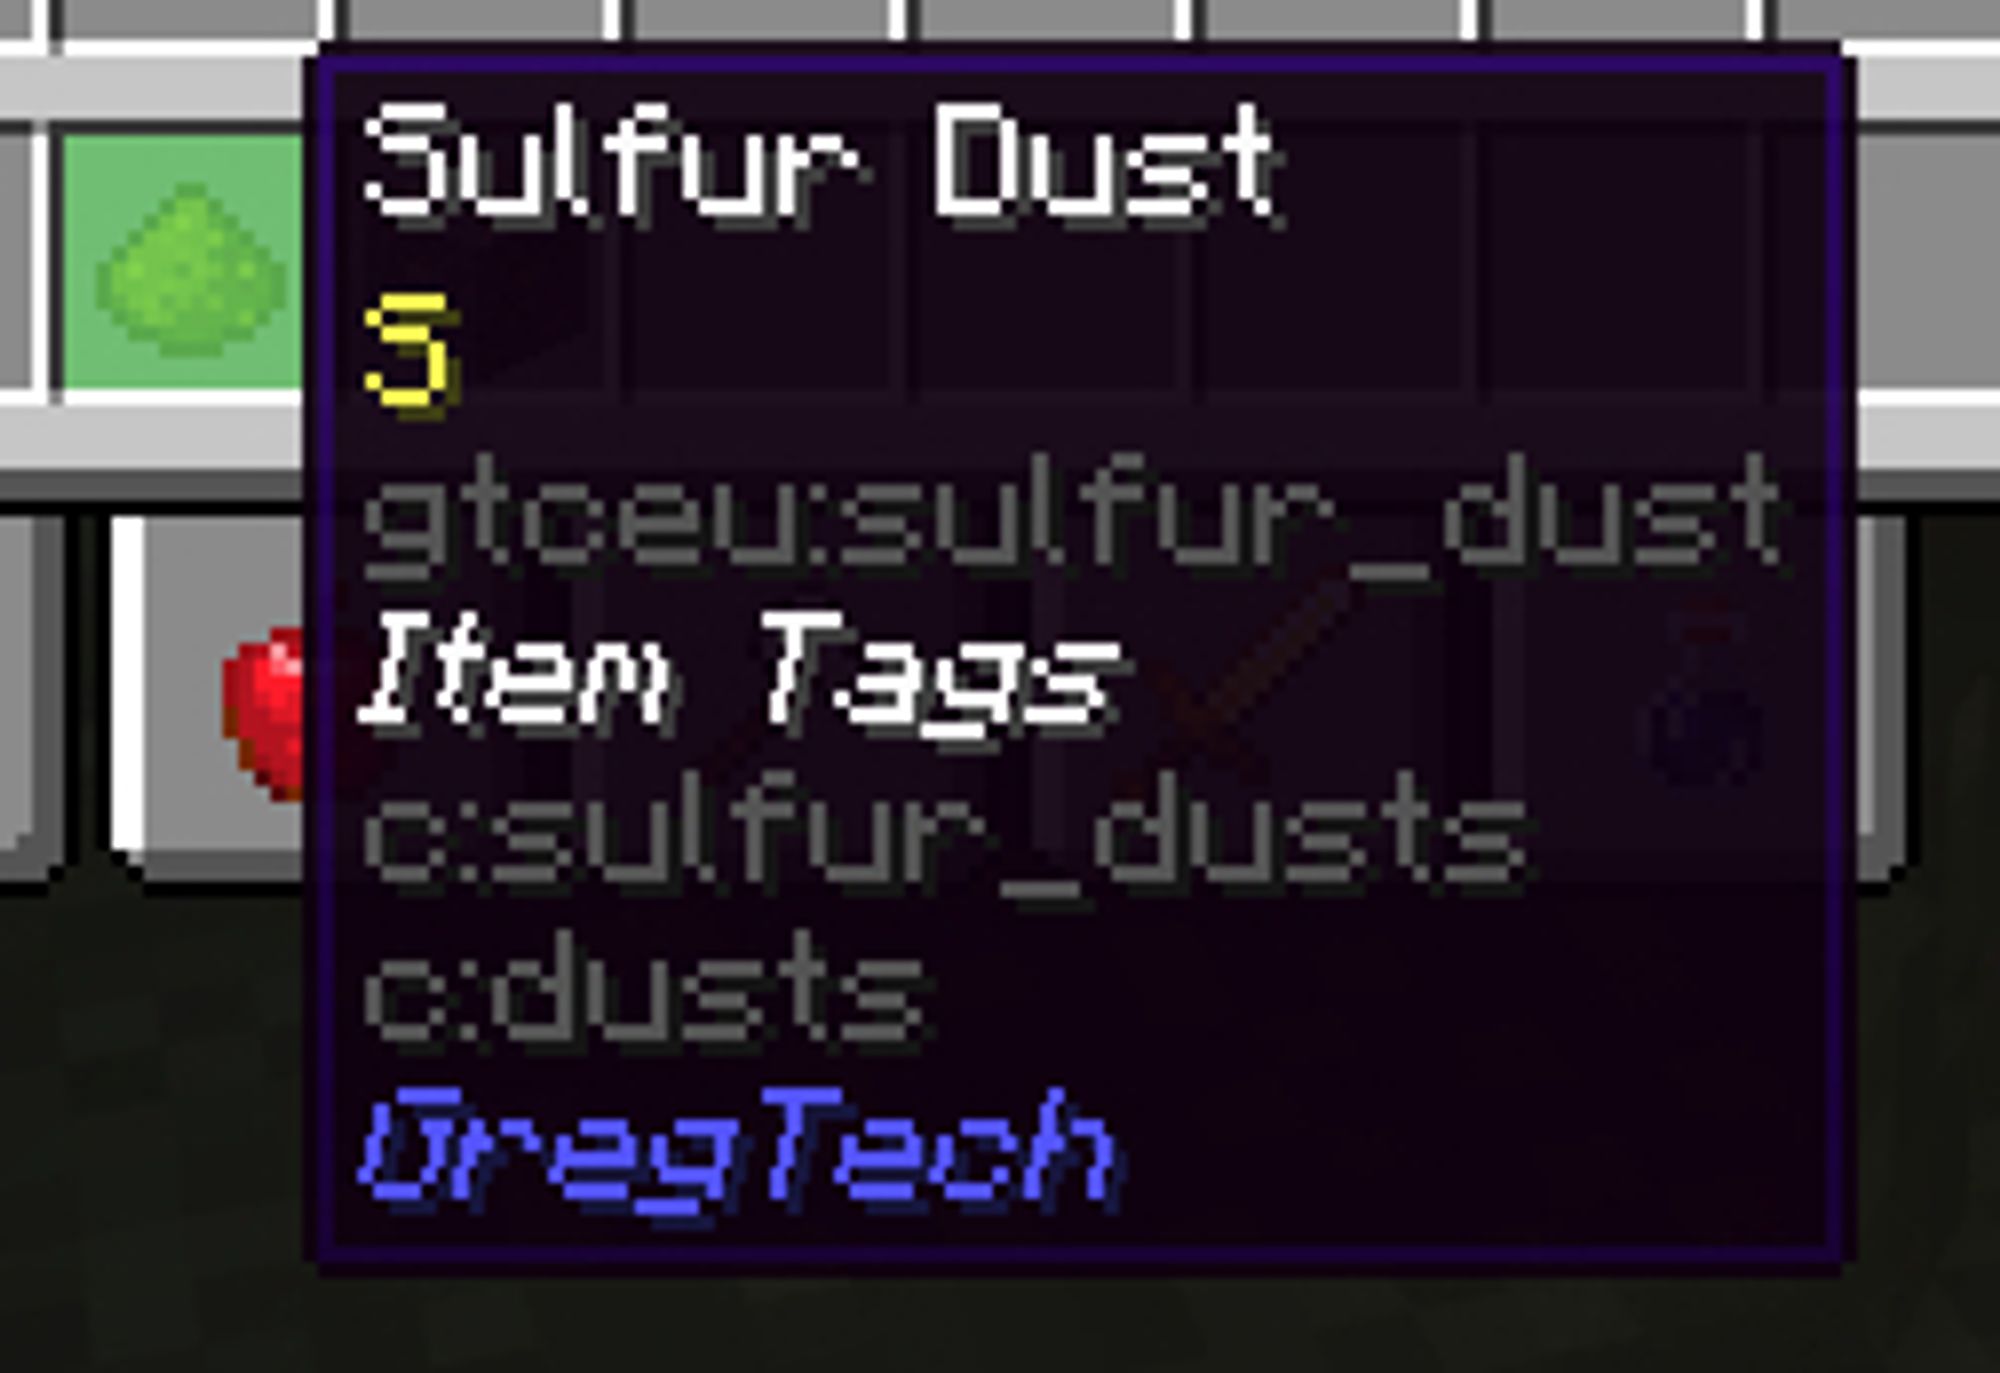 Shows a list of item tags in the tooltip for the item "Sulfur Dust". The tags are "c:sulfur_dusts" and "c:dusts", respectively.